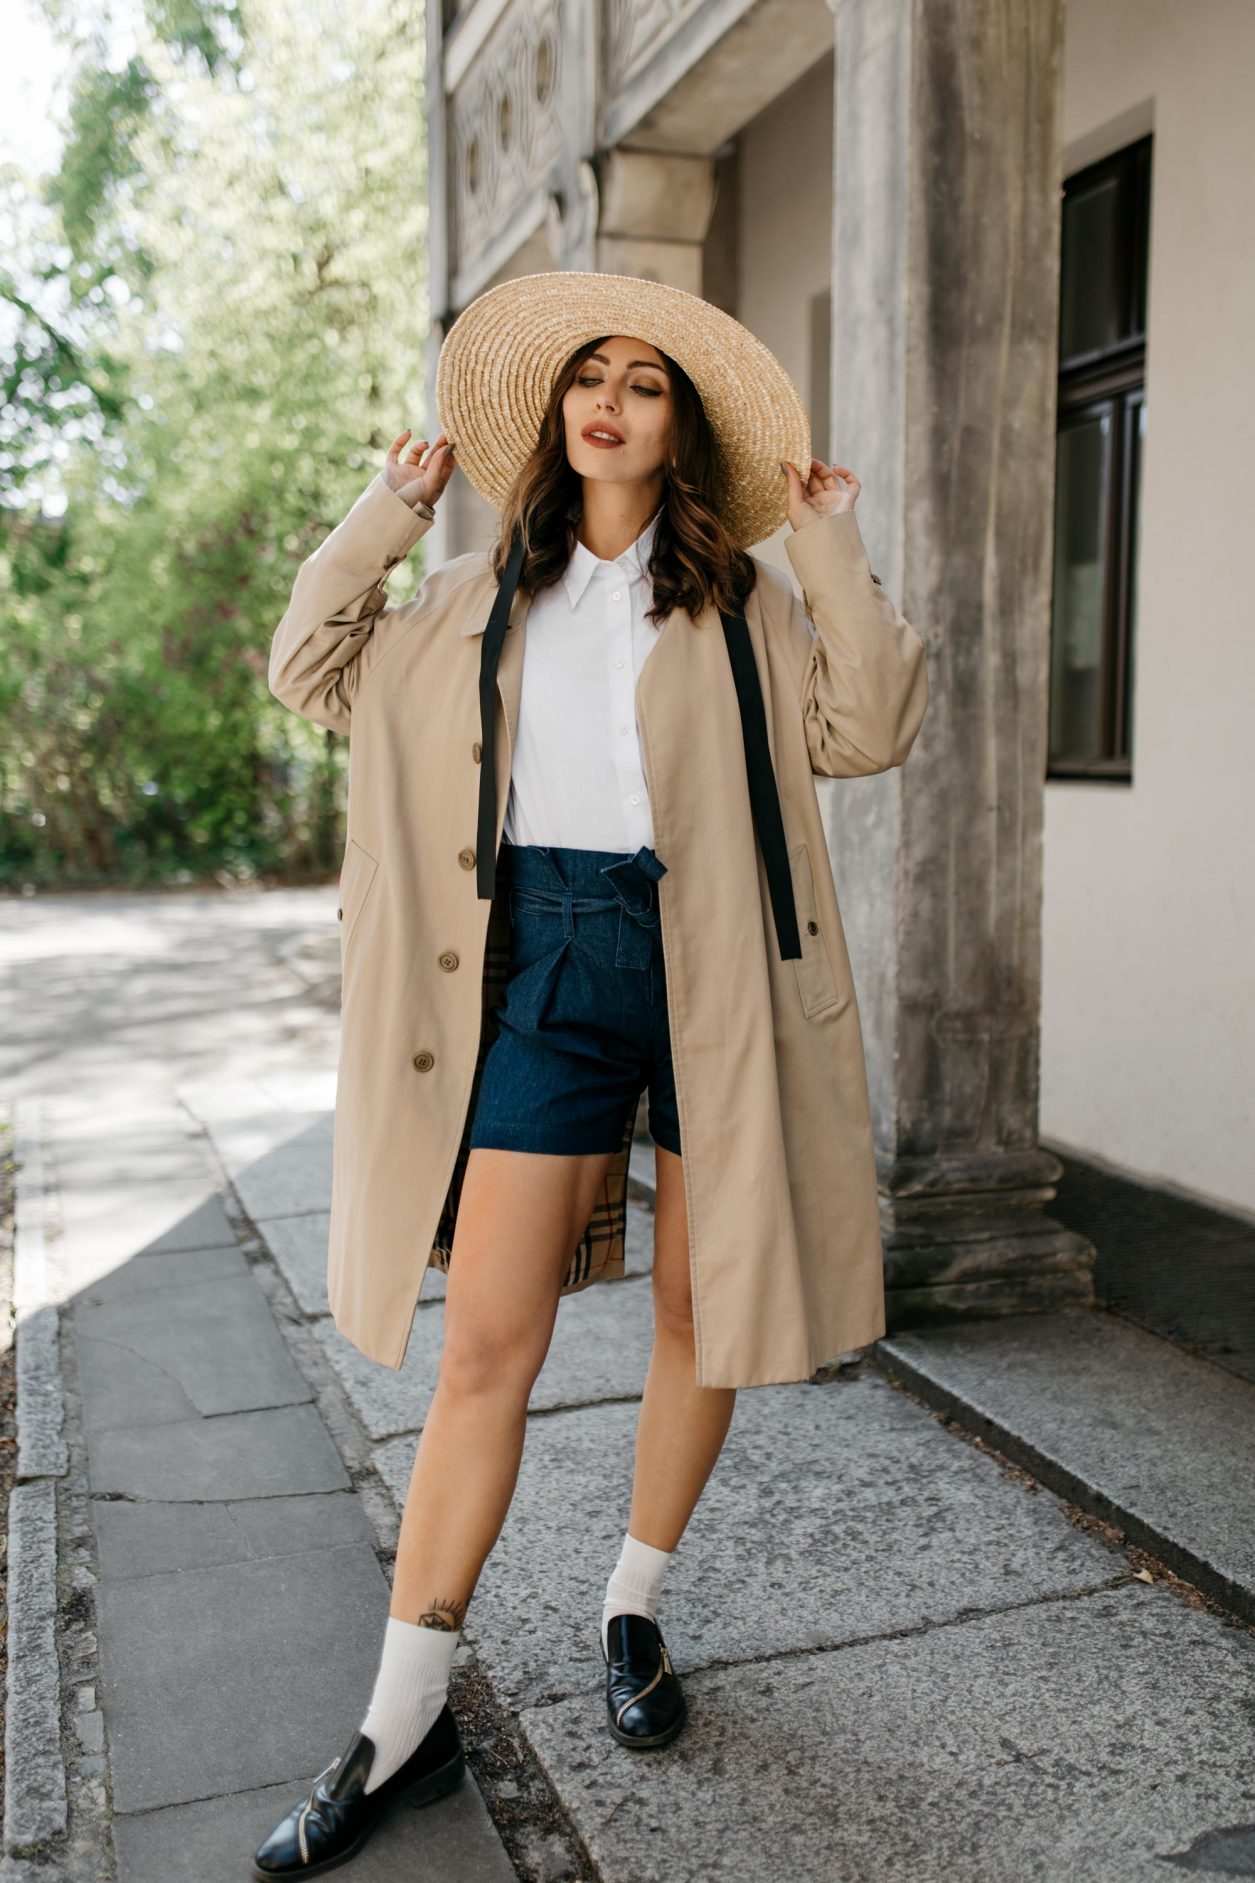 Anzeige | Streetstyle by Masha Sedgwick | Fashion blogger from Berlin, Germany | Spring summer outfit inspiration, minimalistic, english style, effortless cool | Wearing paperbag shorts and sleeveless white blouse by 7 for all mankind, vintage short Burberry coat, straw hat, white socks with black leather loafers